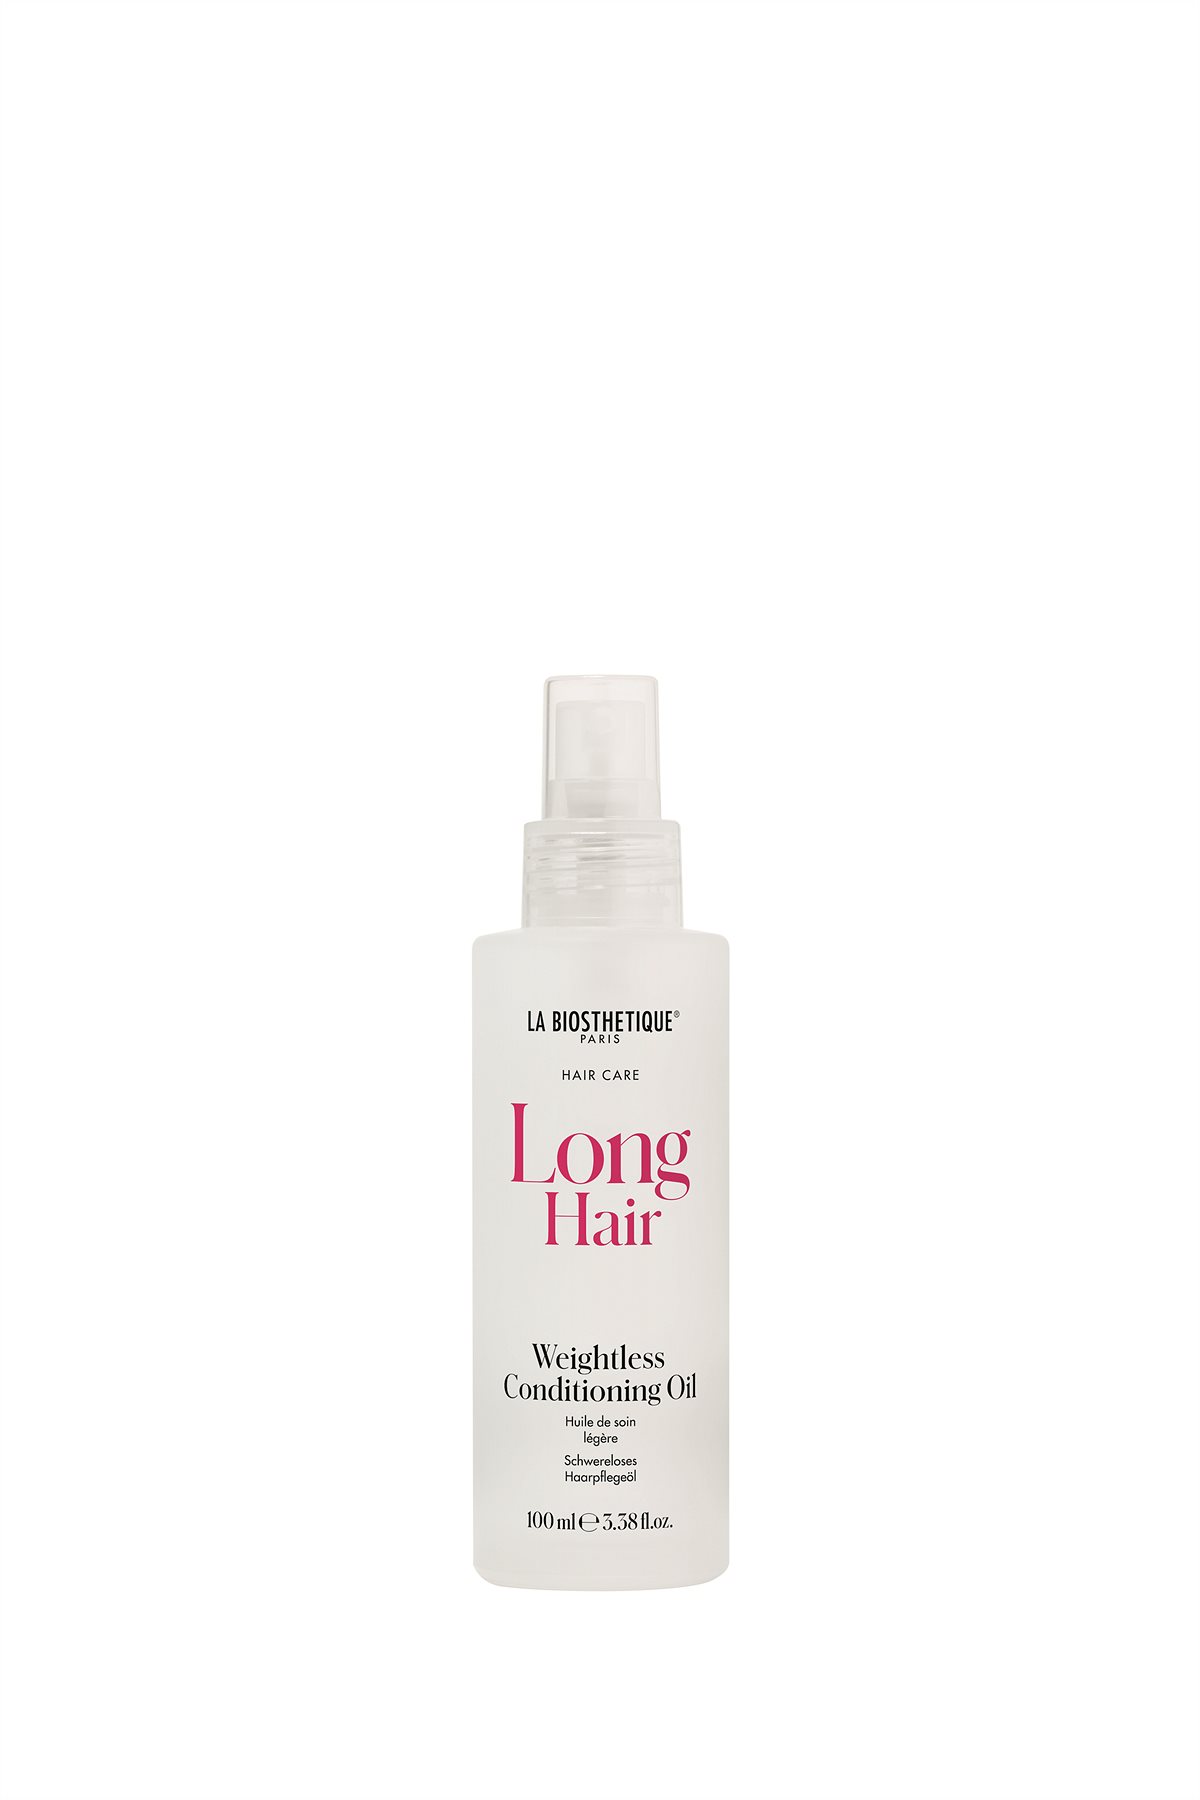 La Biosthétique Long Hair_Weightless Conditioning Oil_100ml_EUR 40,50